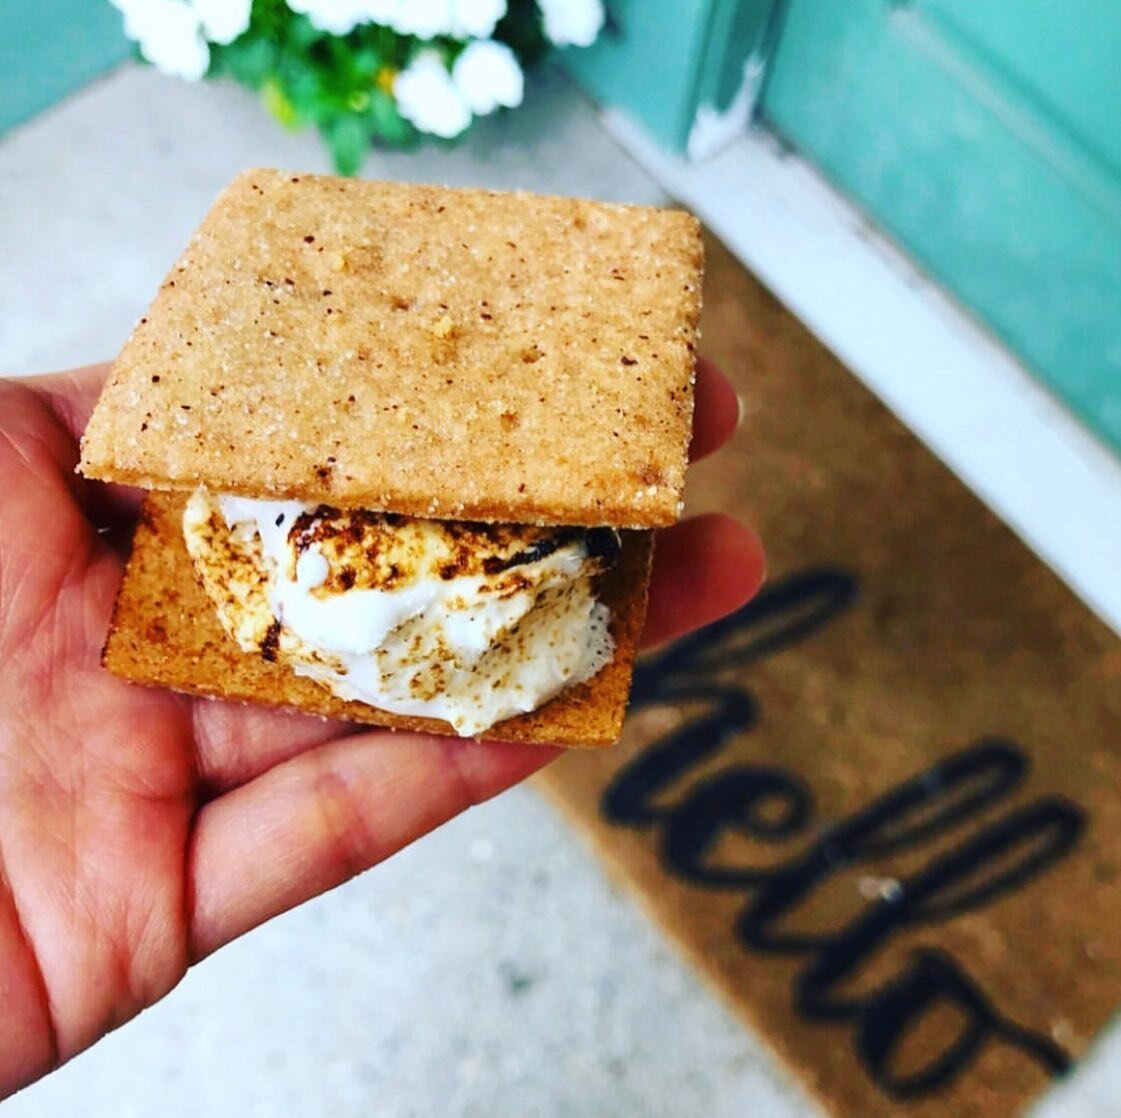 Today at the farm - our friends from Hudson Valley Marshmallow Co. are onsite toasting up their famously tasty s&rsquo;mores! 

Choose from a variety of flavored marshmallows like Salted Caramel, French Toast, Pumpkin Spice and more! At Dutch&rsquo;s